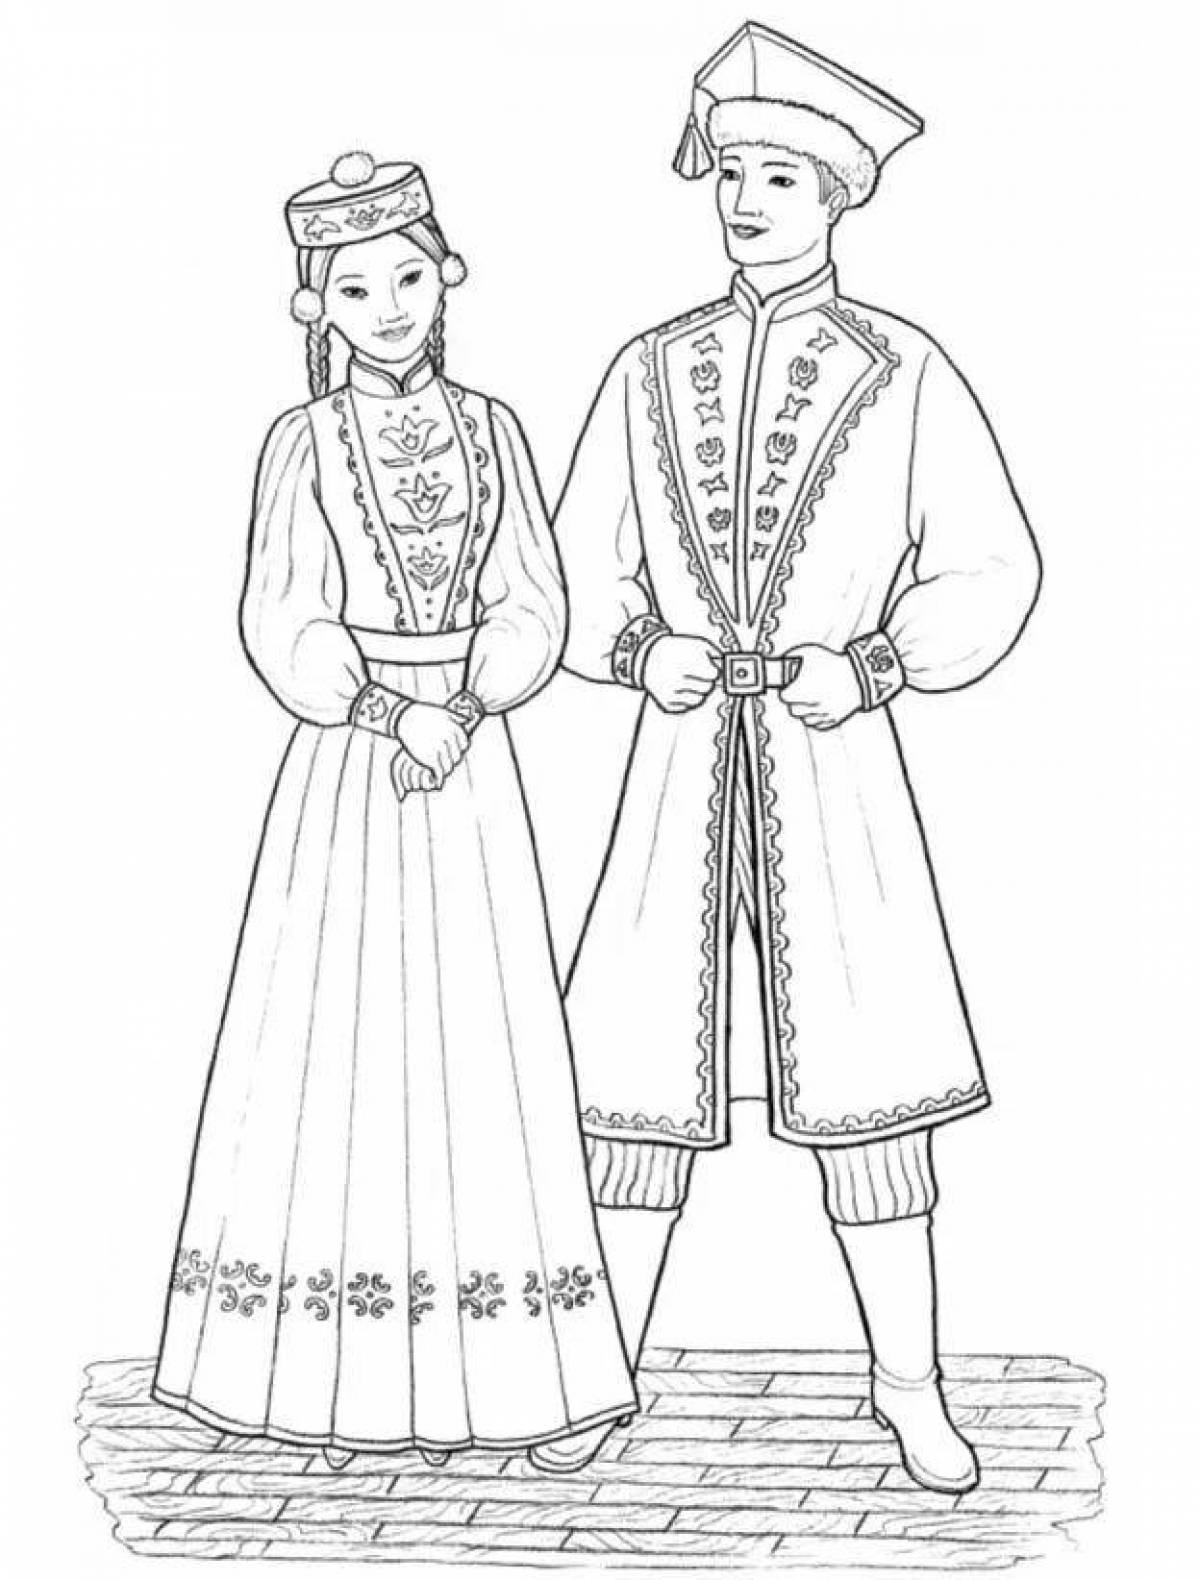 Costumes of the peoples of Russia #7